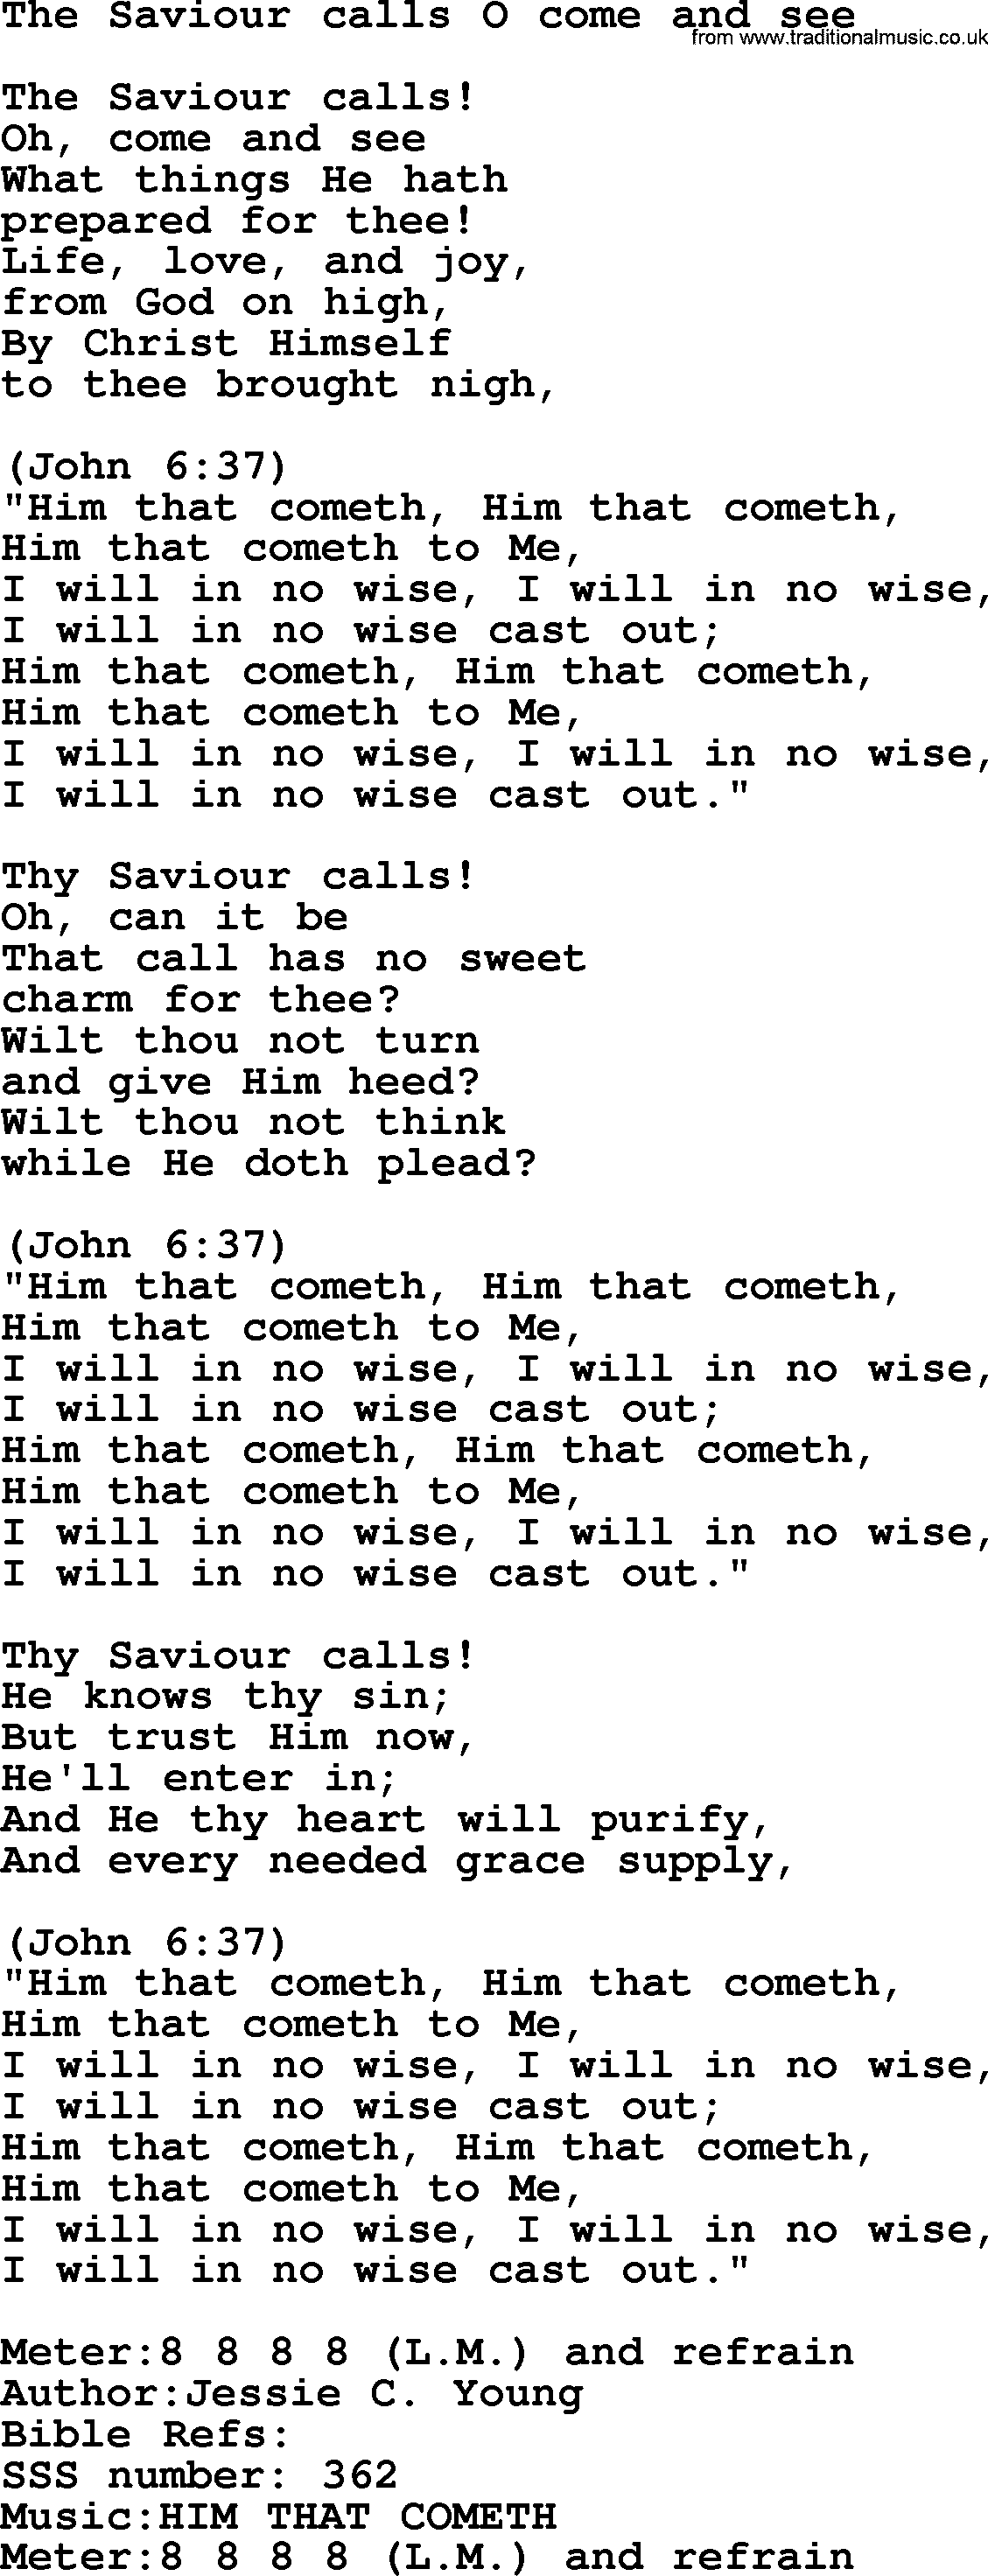 Sacred Songs and Solos complete, 1200 Hymns, title: The Saviour Calls O Come And See, lyrics and PDF